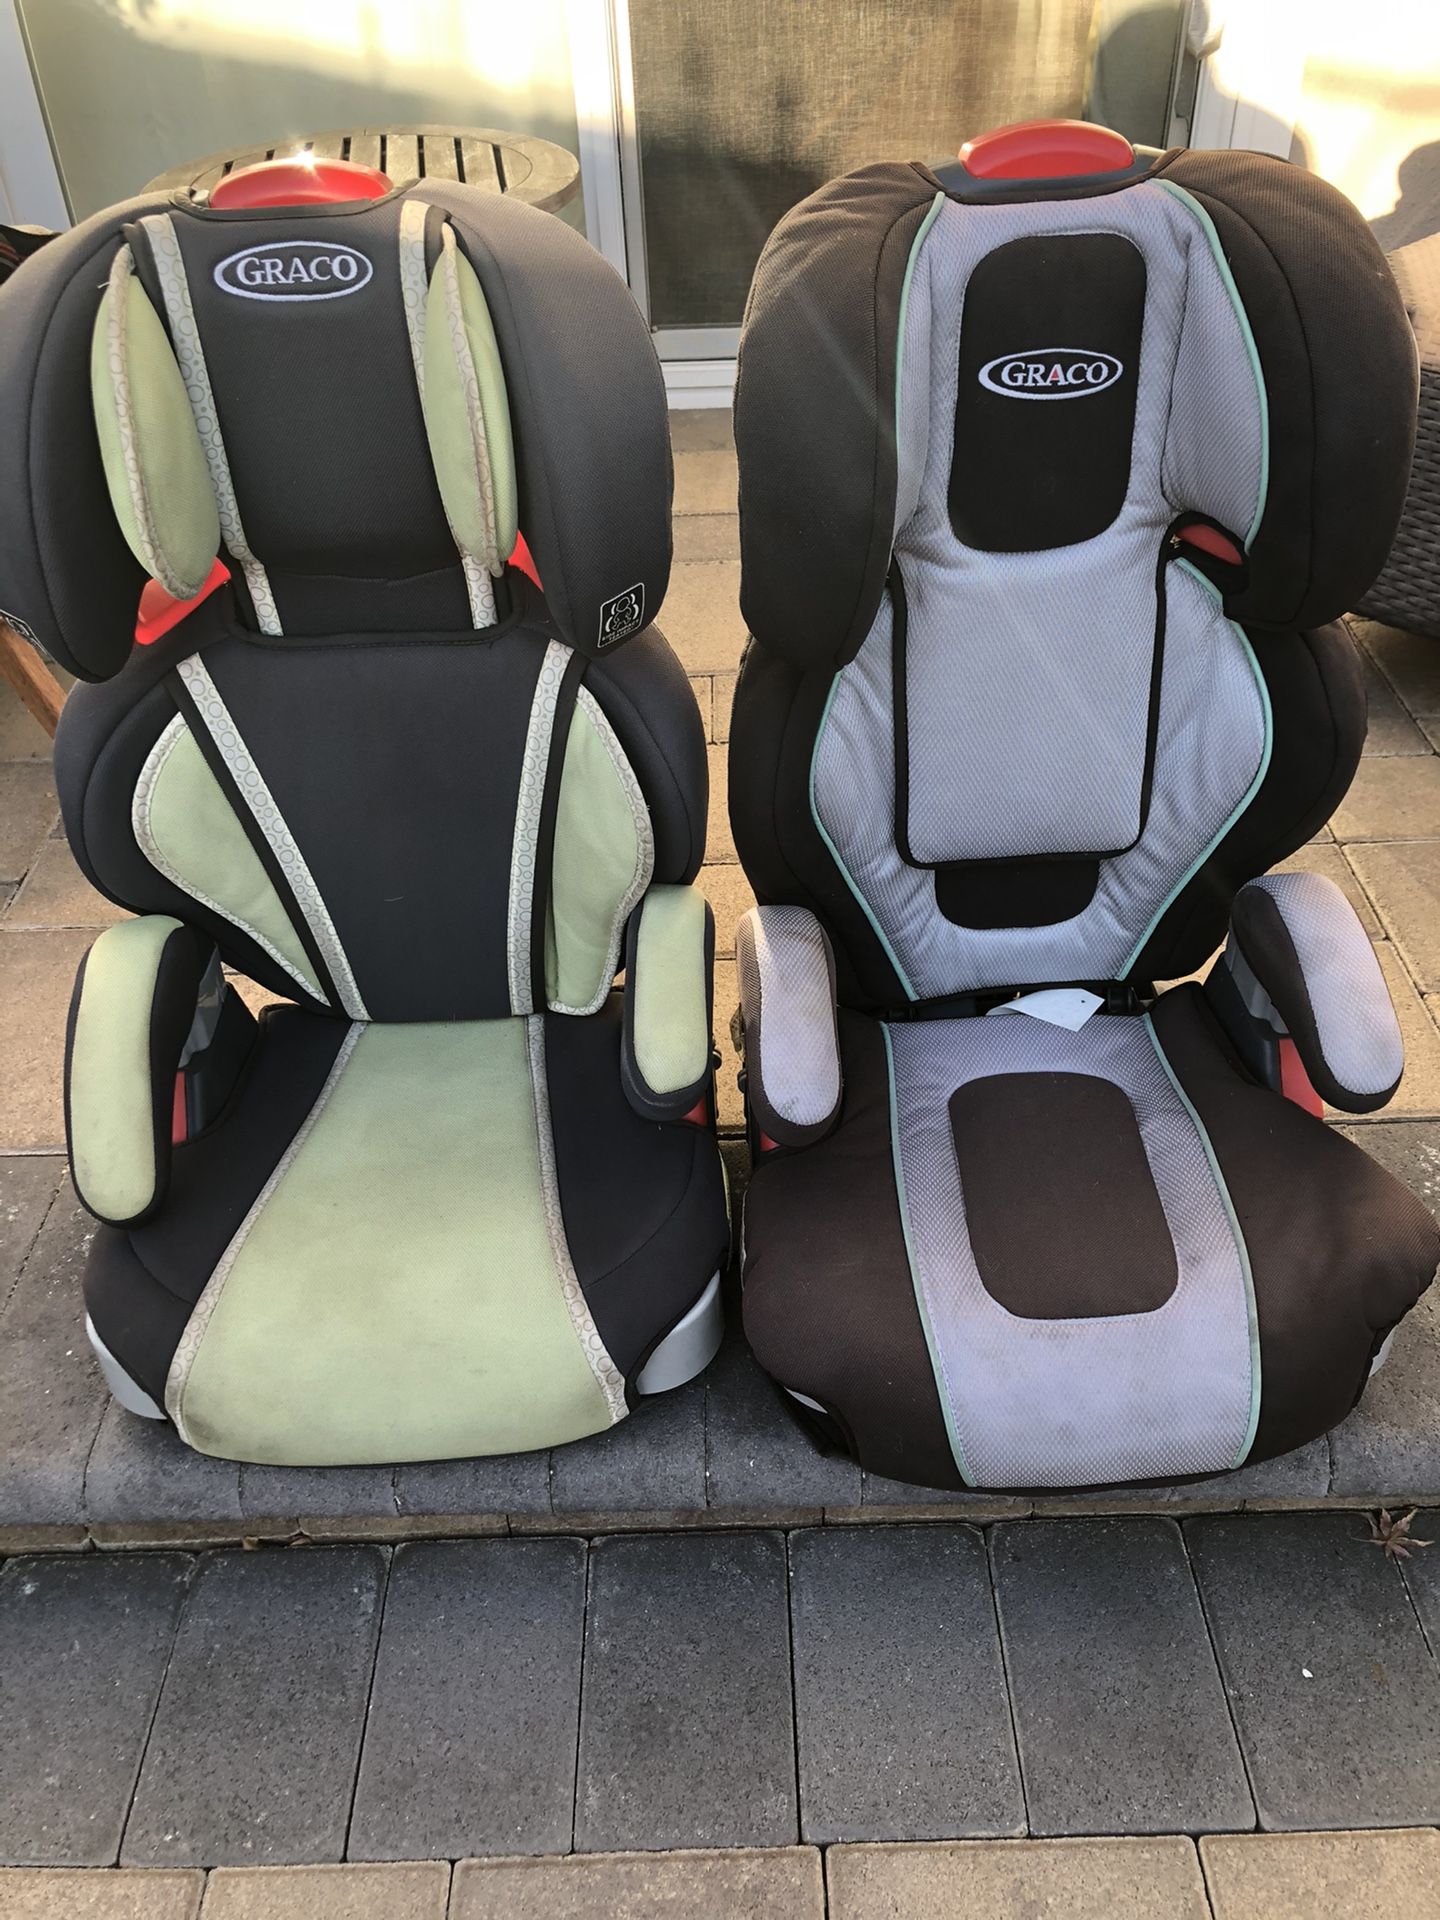 2 Graco Booster Seats